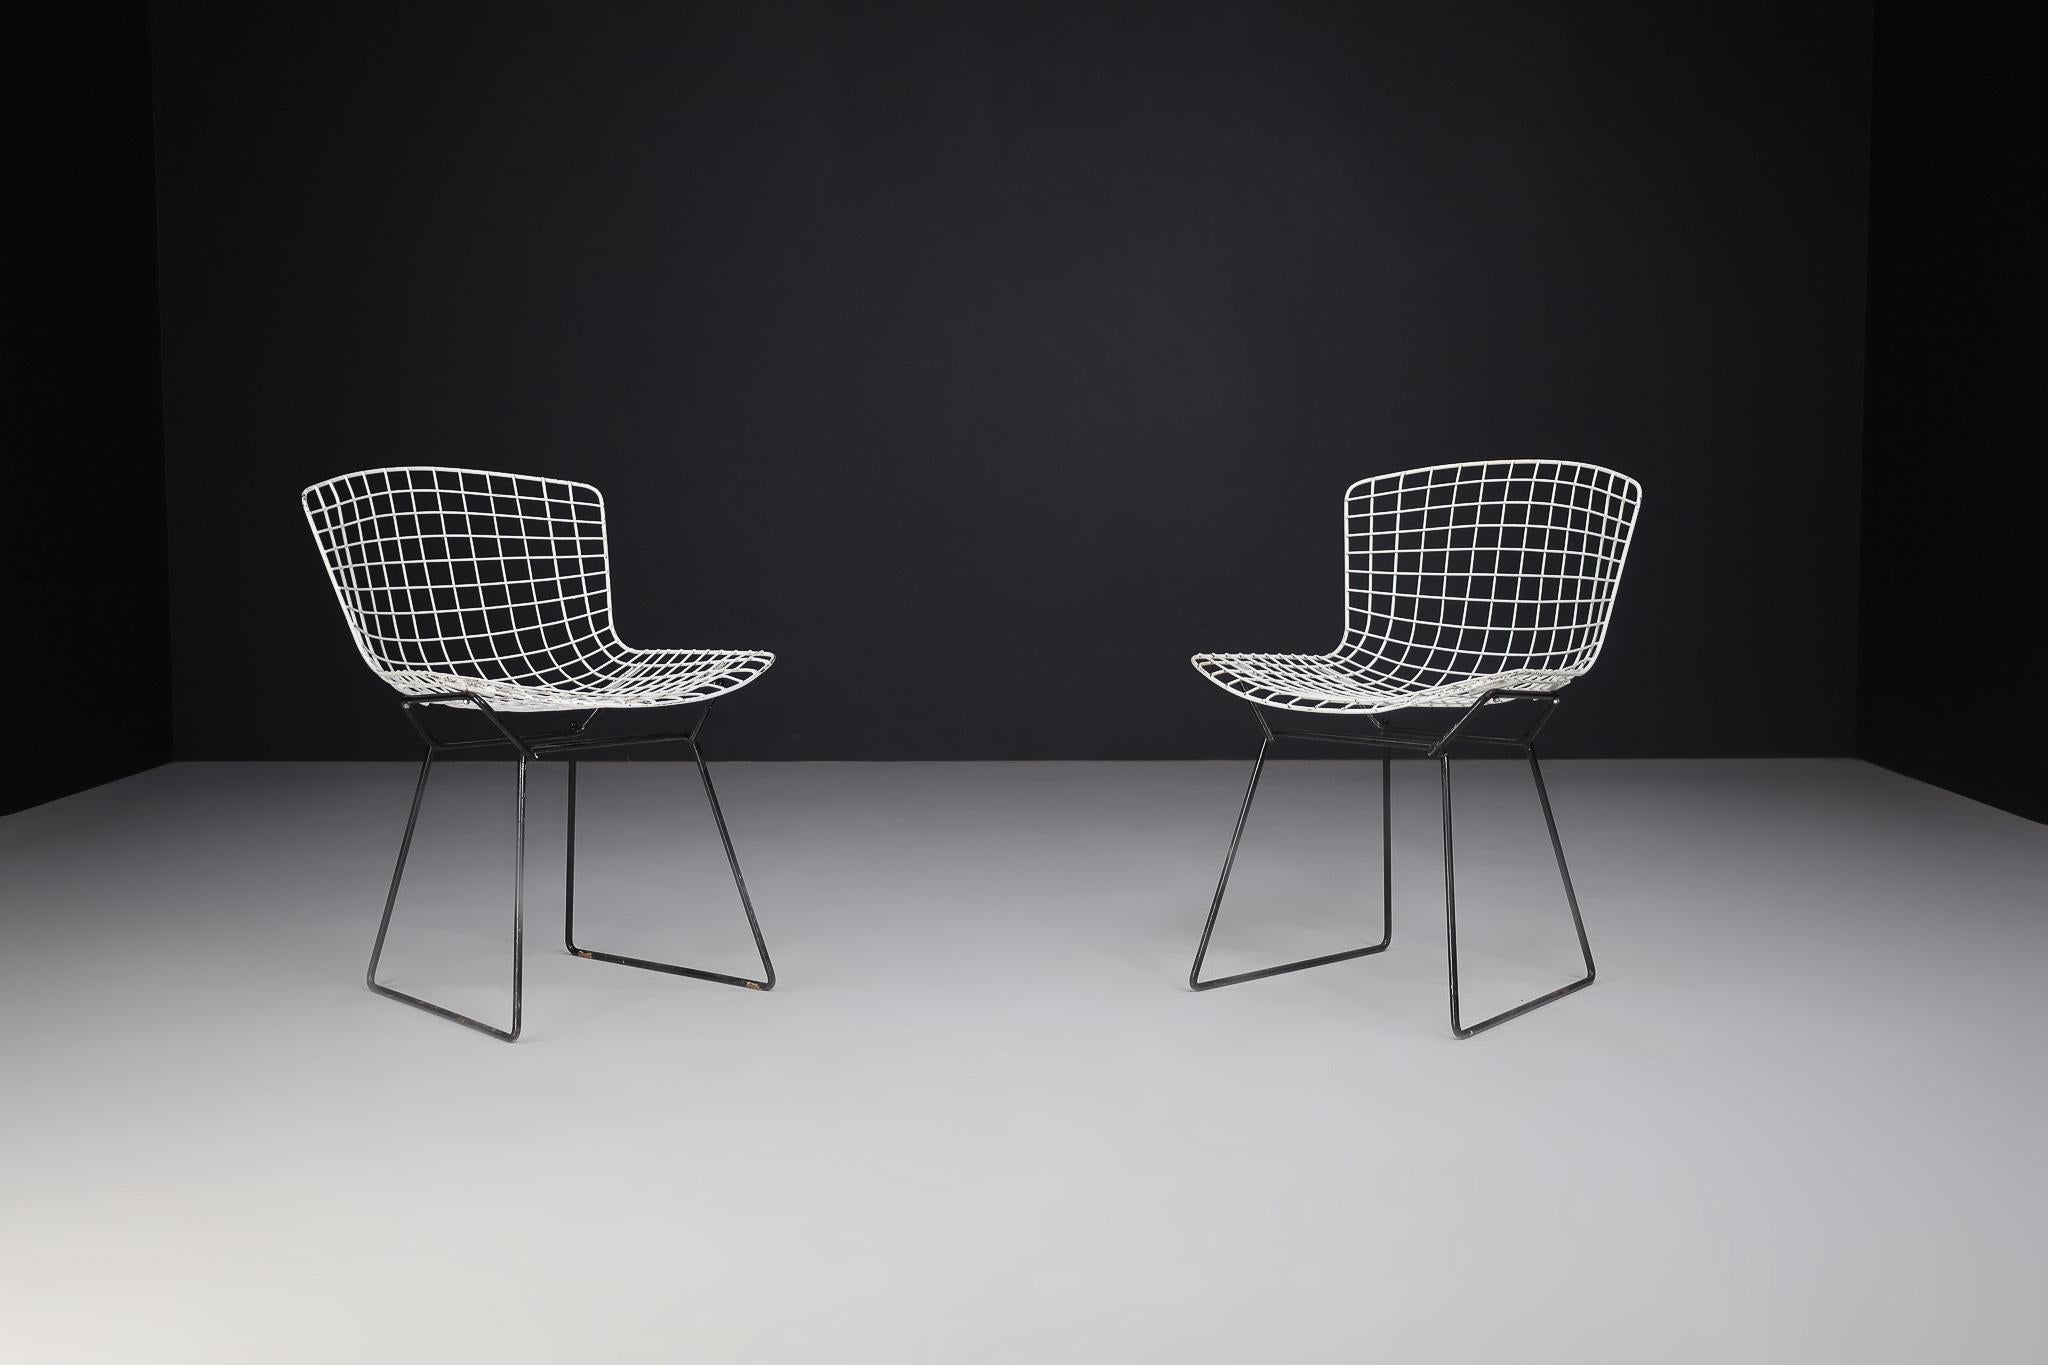 This pair of Bertoia side chair is composed of delicate steel rods that have been precisely interwoven and welded to create airy, sculptural seats. Despite their delicate filigreed appearance, the chairs are supremely strong. 

More information